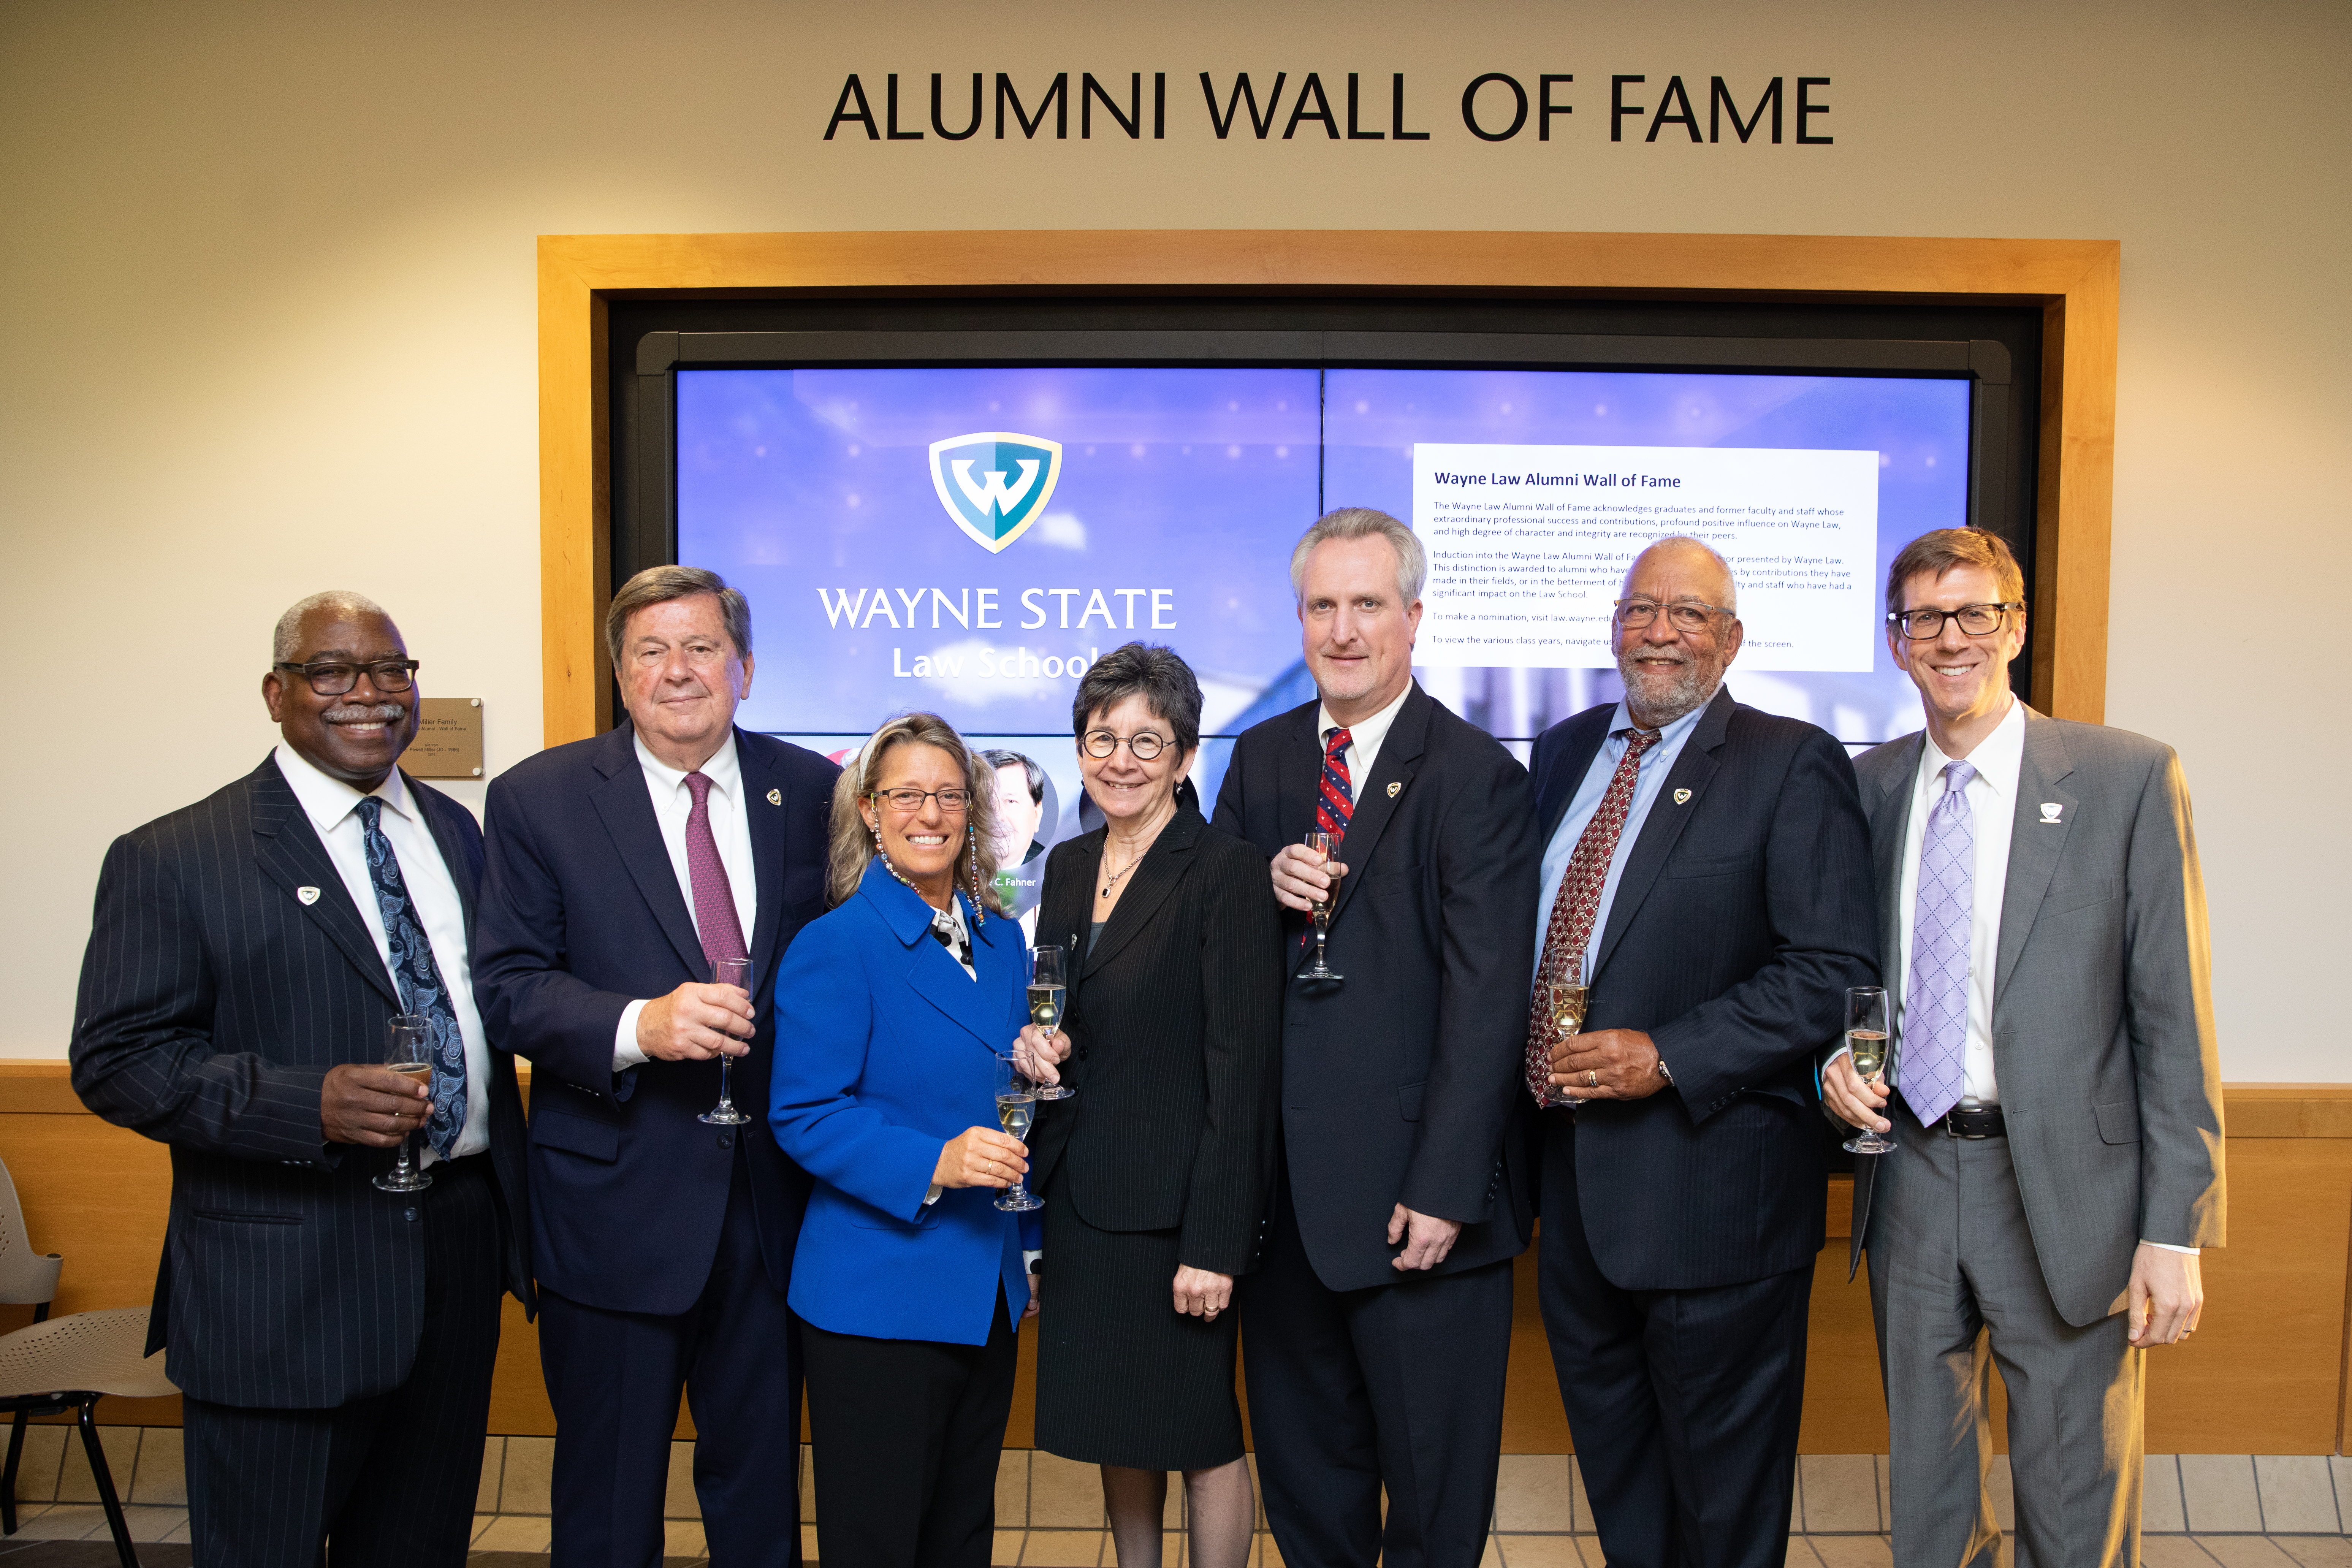 Inductees stand with Dean Bierschbach and Judge Edward Ewell Jr.